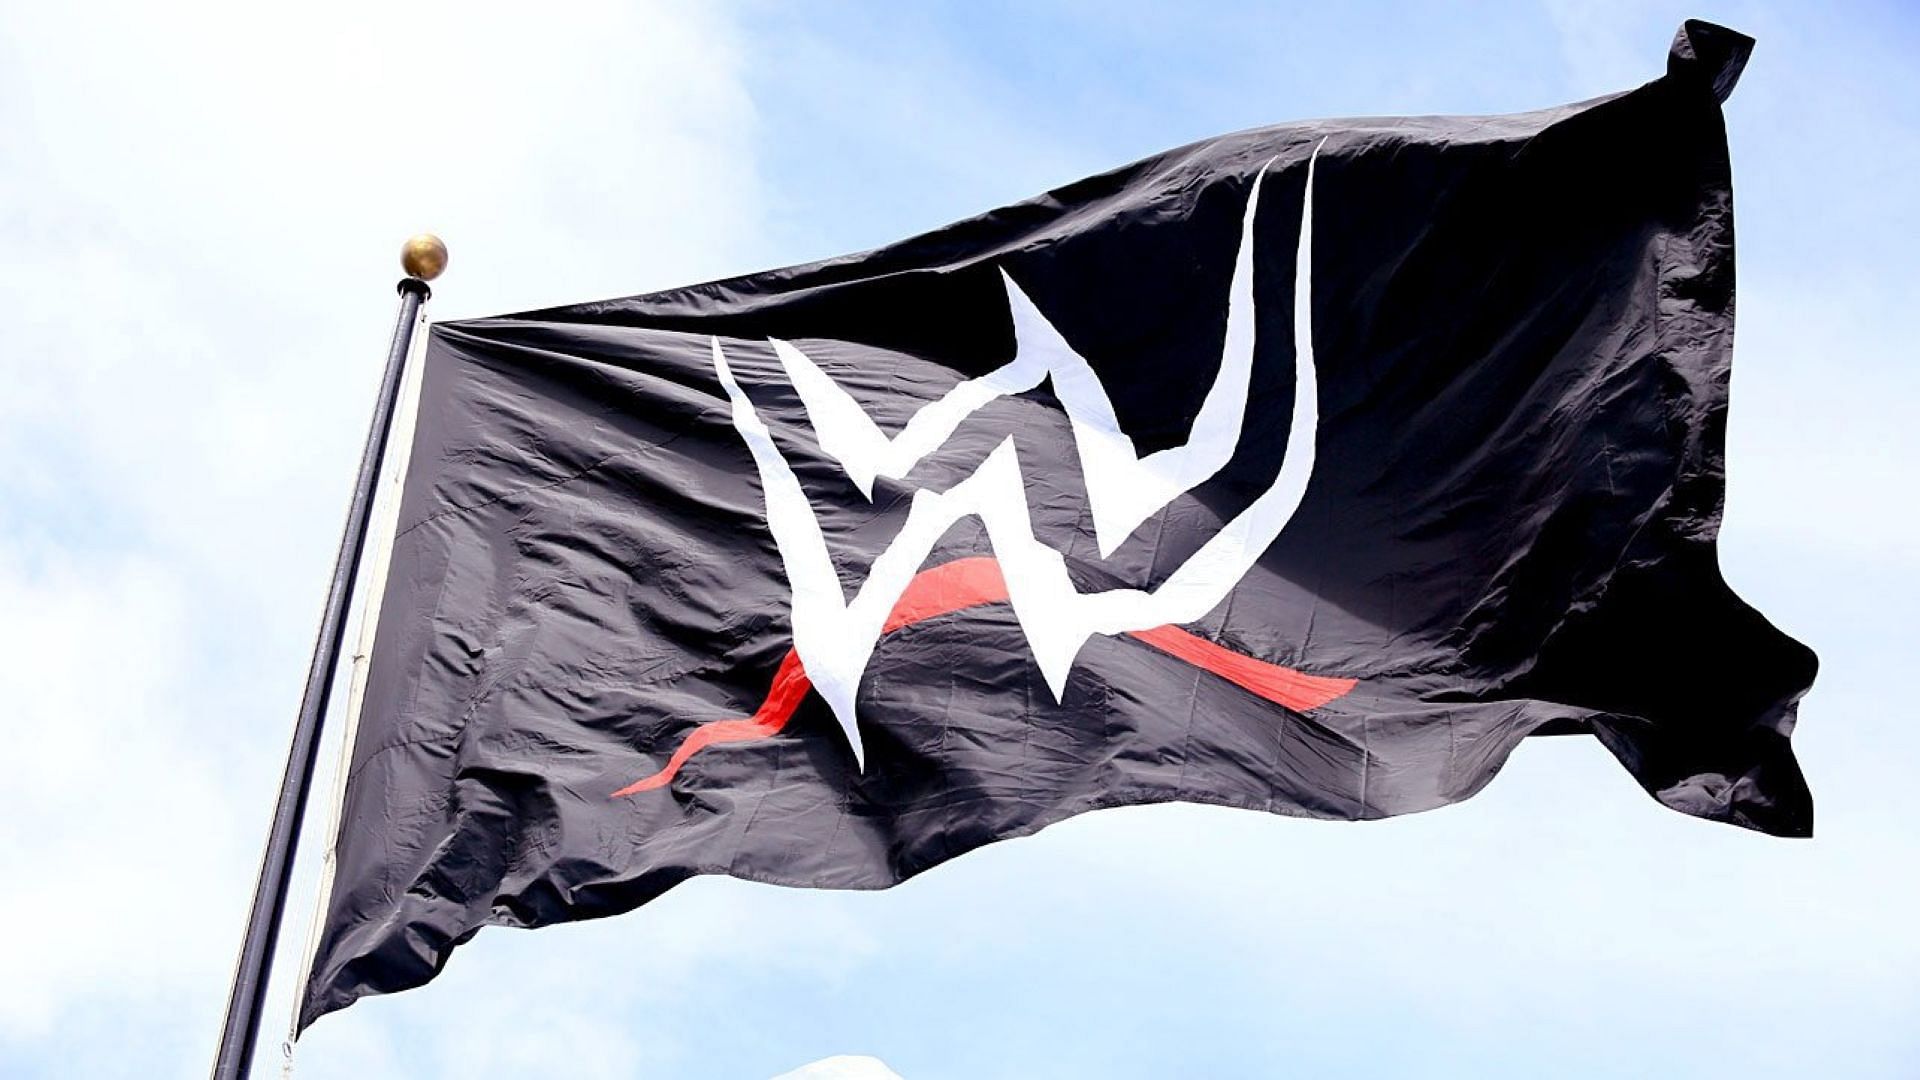 The official WWE logo flag on display at company HQ in Stamford